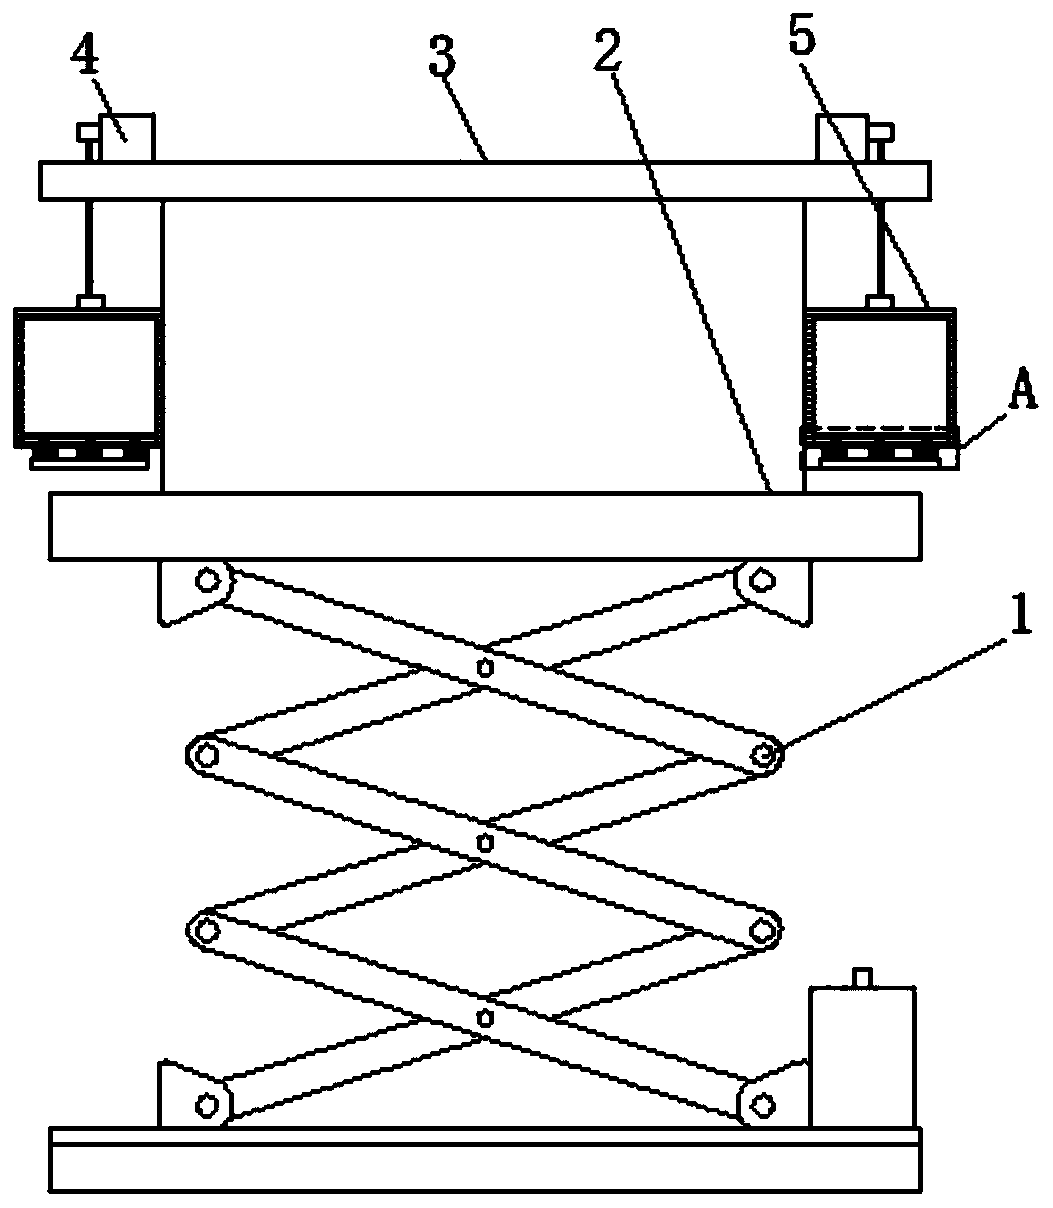 Lifter with hanging boxes